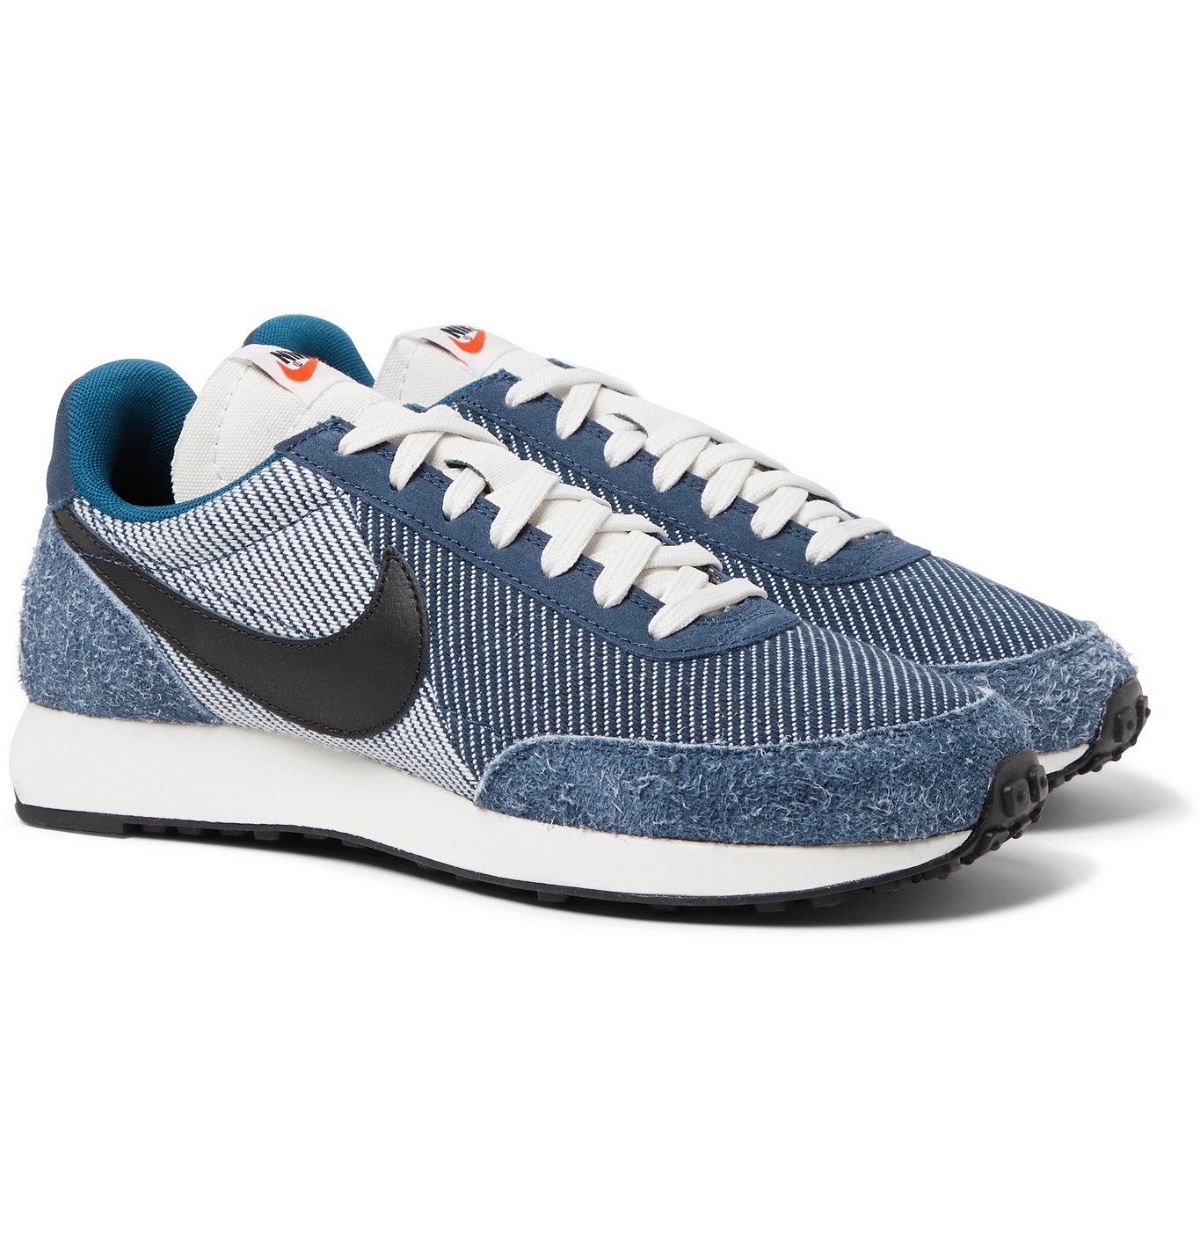 NIKE - Air Tailwind 79 SE Jacquard, Leather and Textured Suede